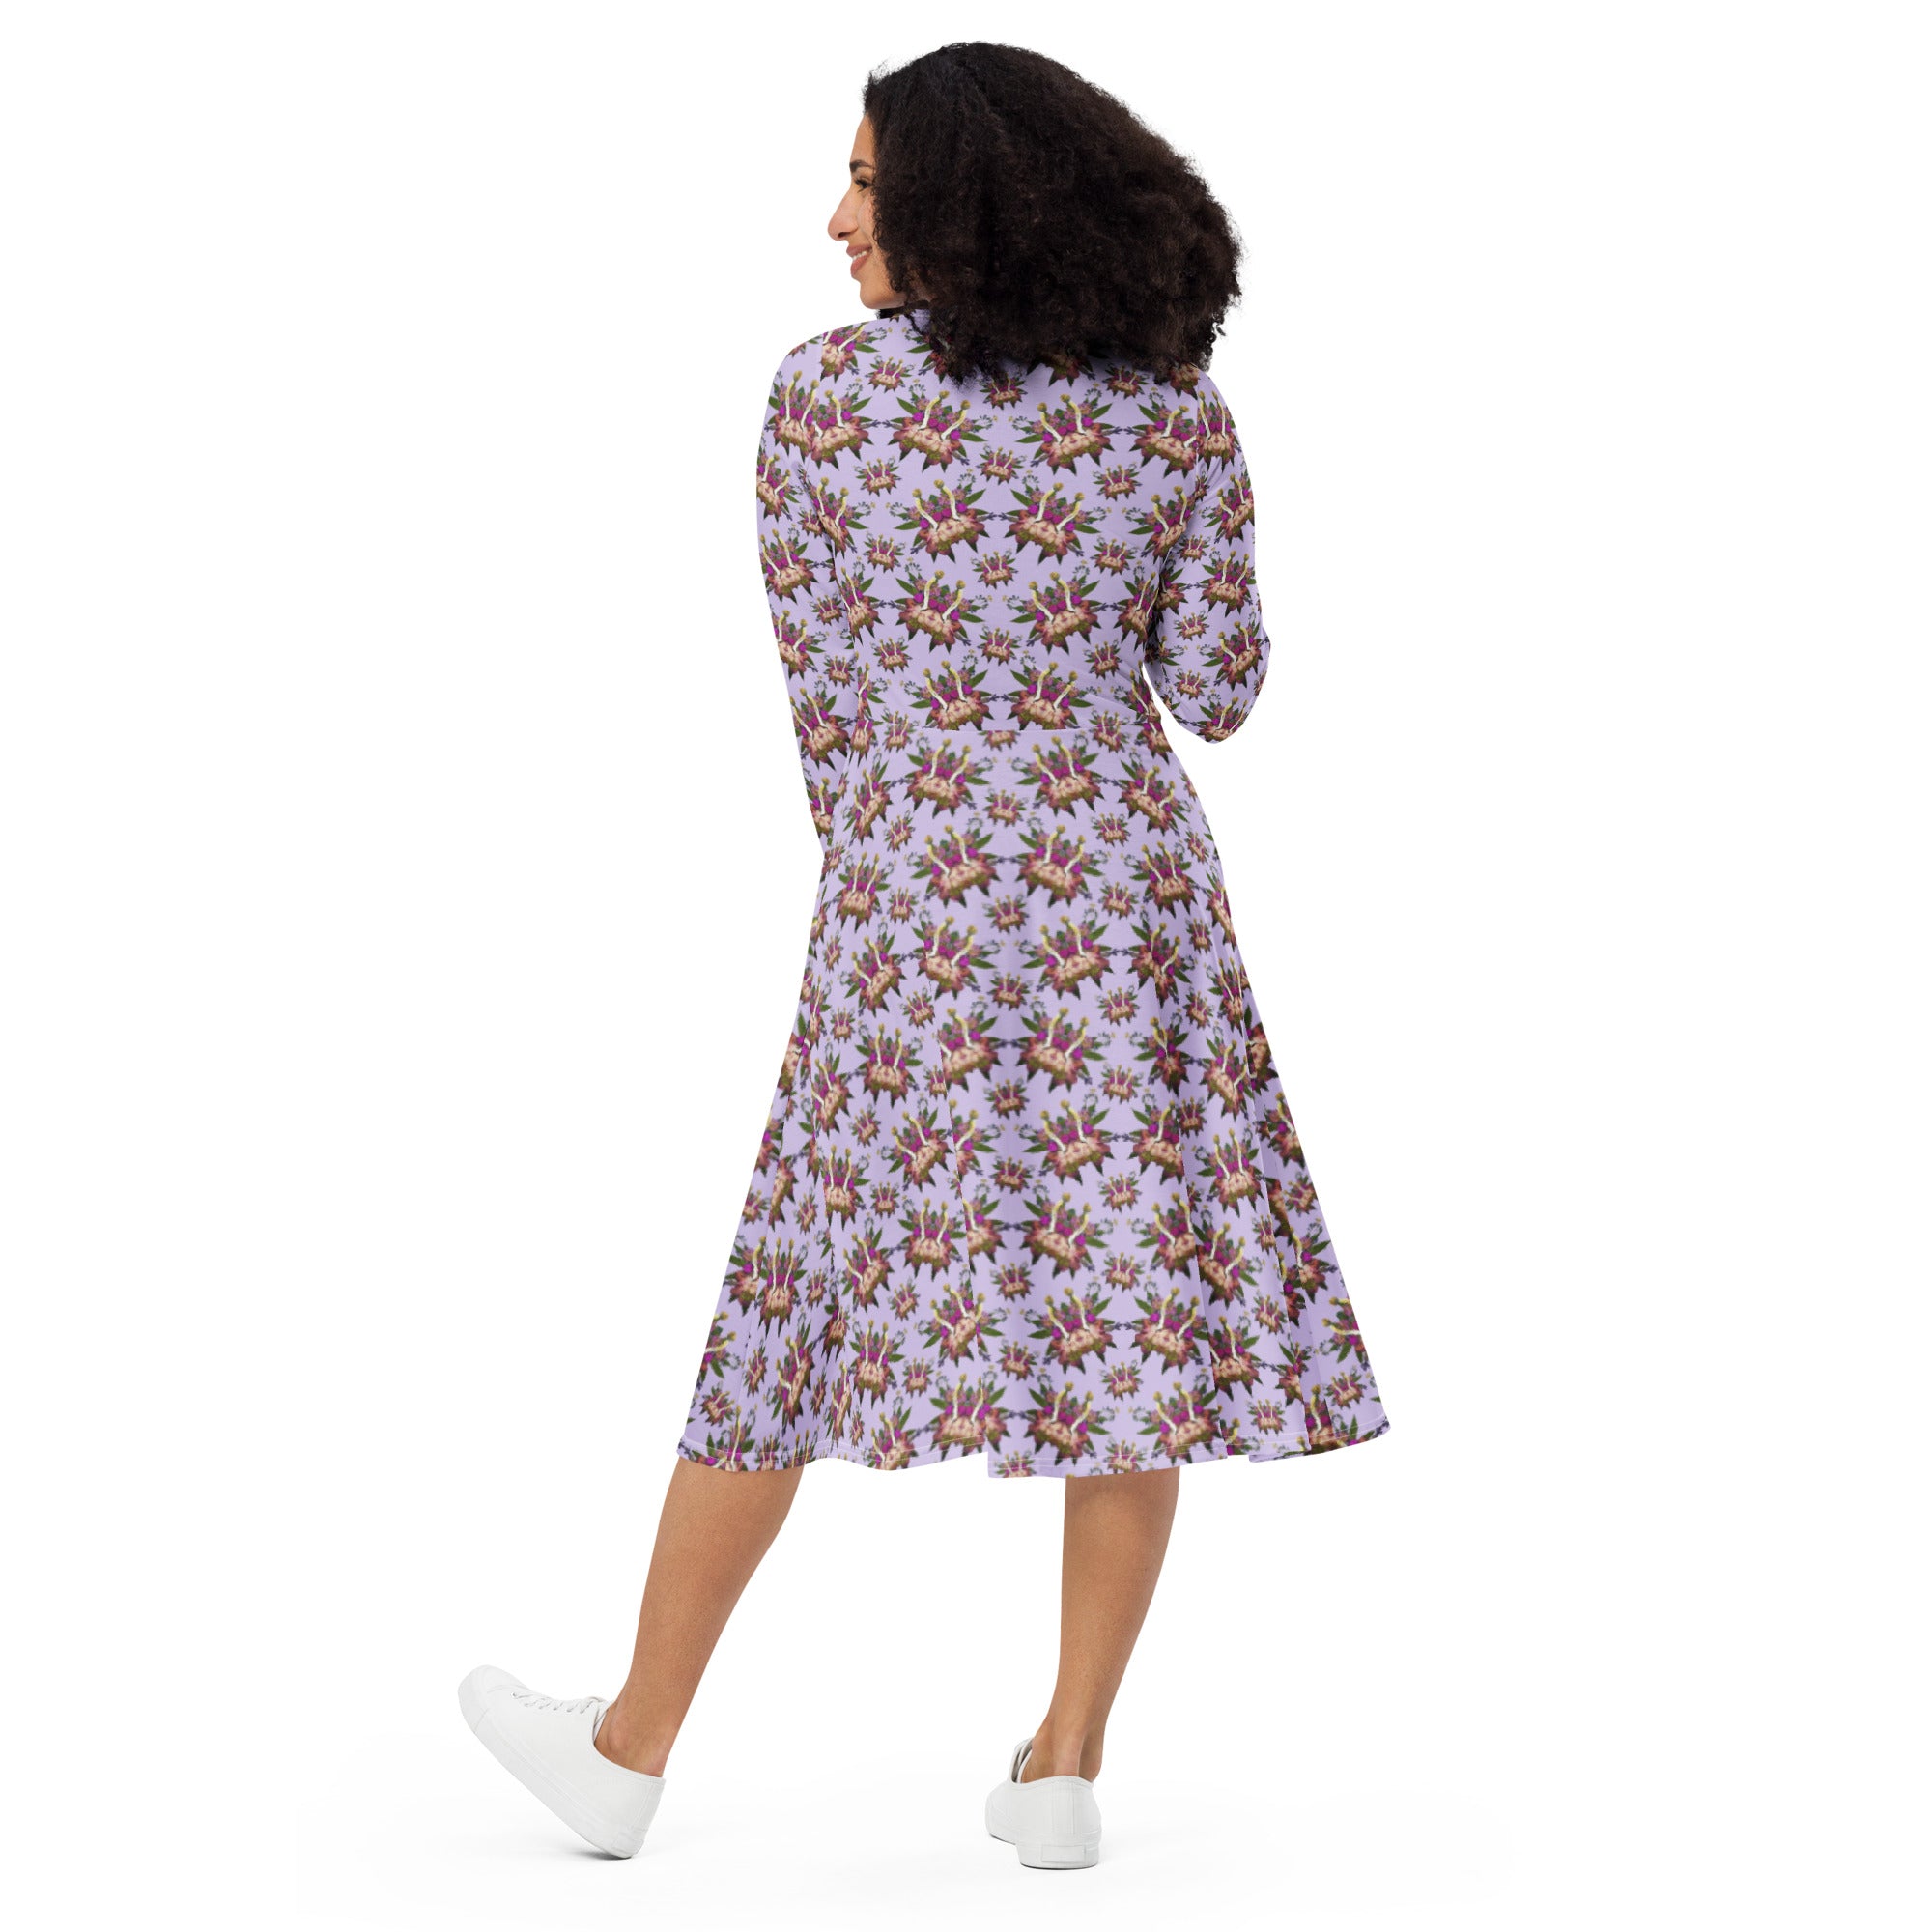 Fungeyes Playful (Purps) All-over print long sleeve midi dress